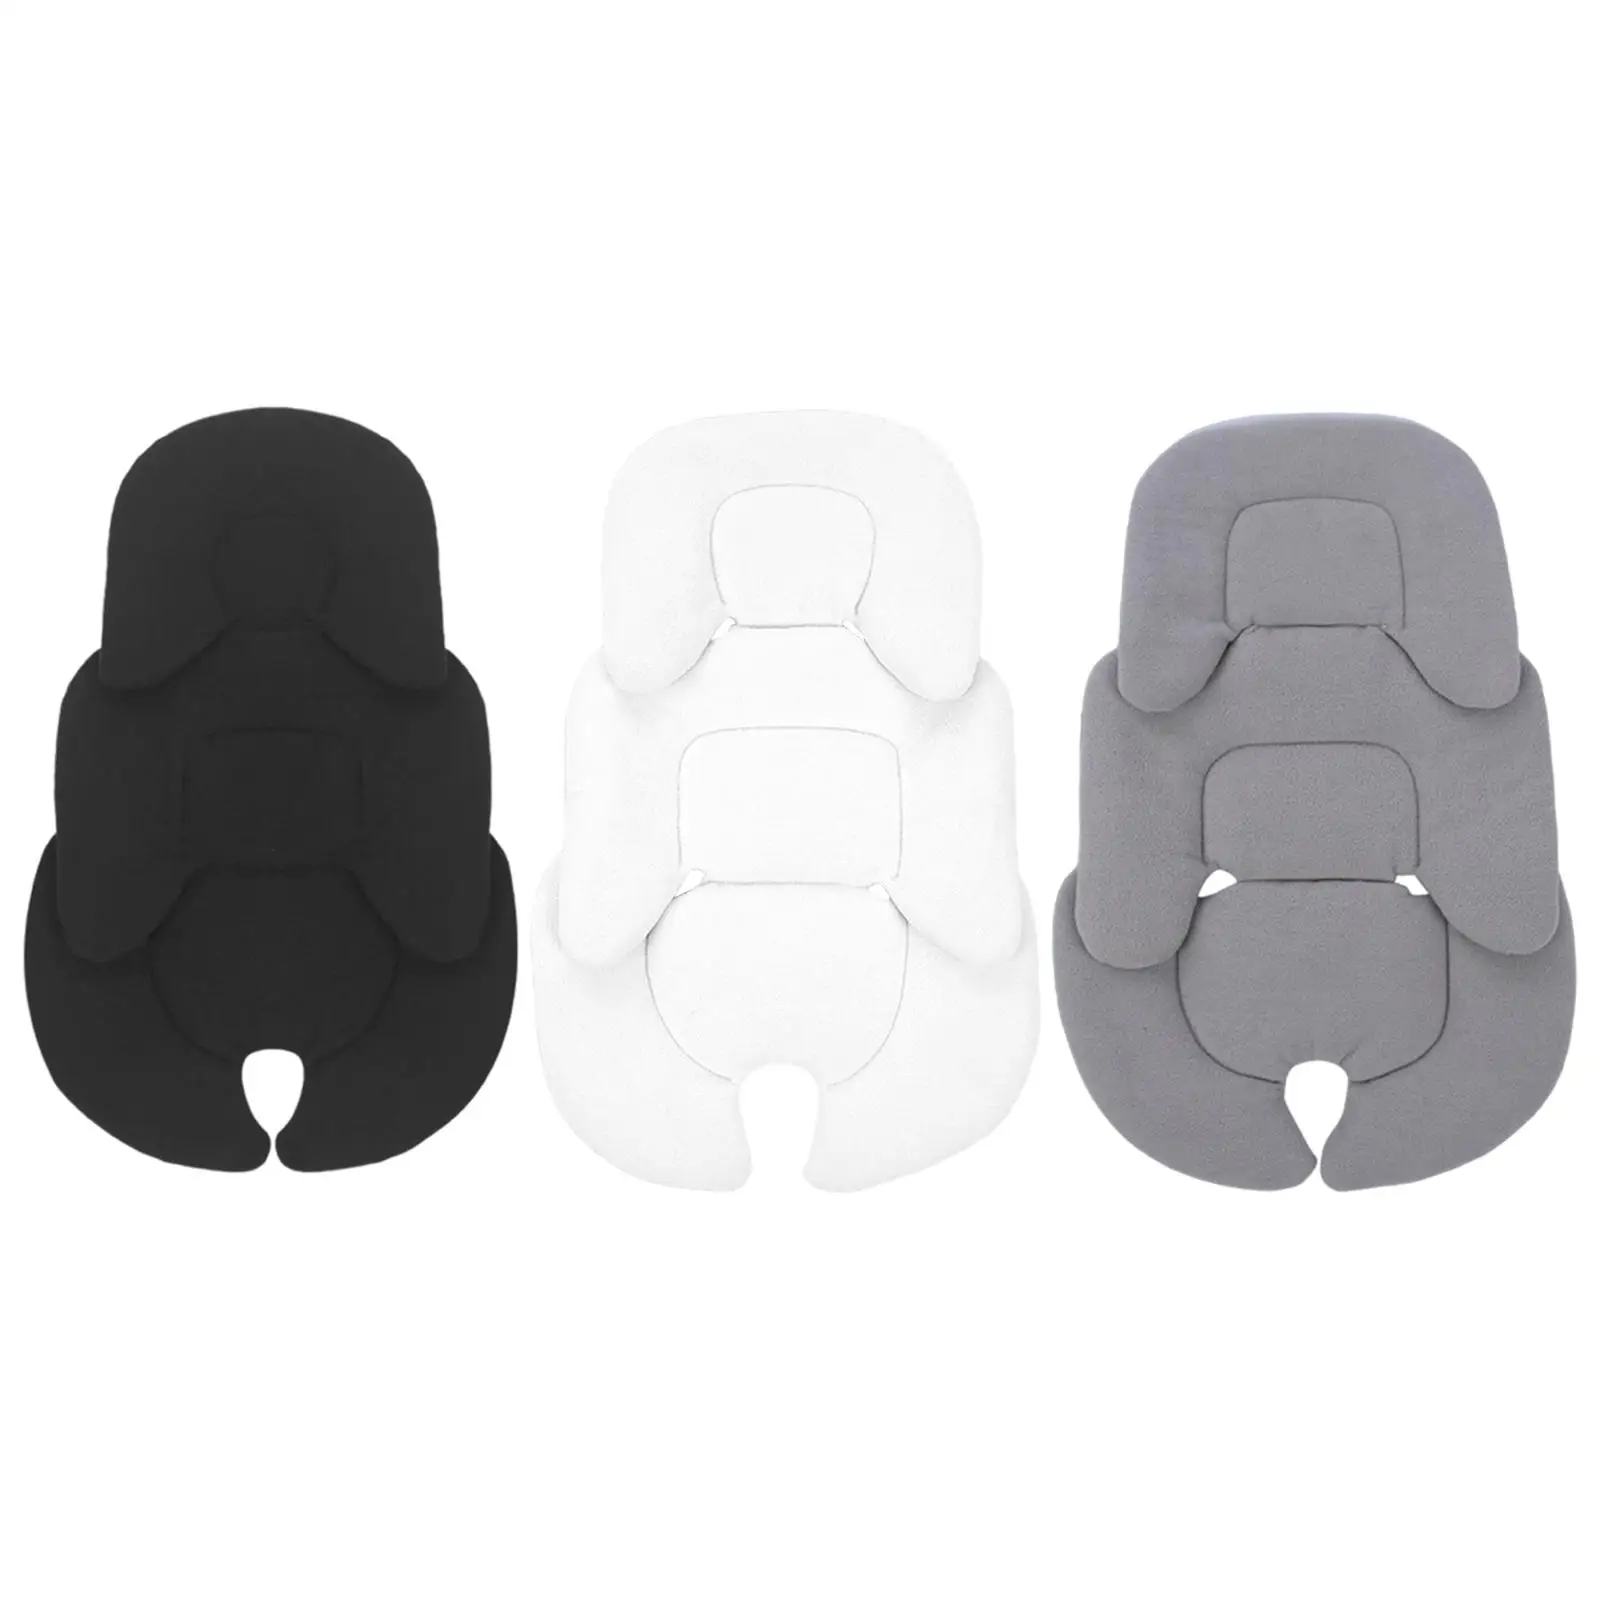 baby stroller accessories box Baby Stroller Cushion Head and Body Support Pillow Car Seat Pad Liner Baby Shower Gifts Car Seat Insert for Baby Newborn Infant baby jogger double stroller accessories	